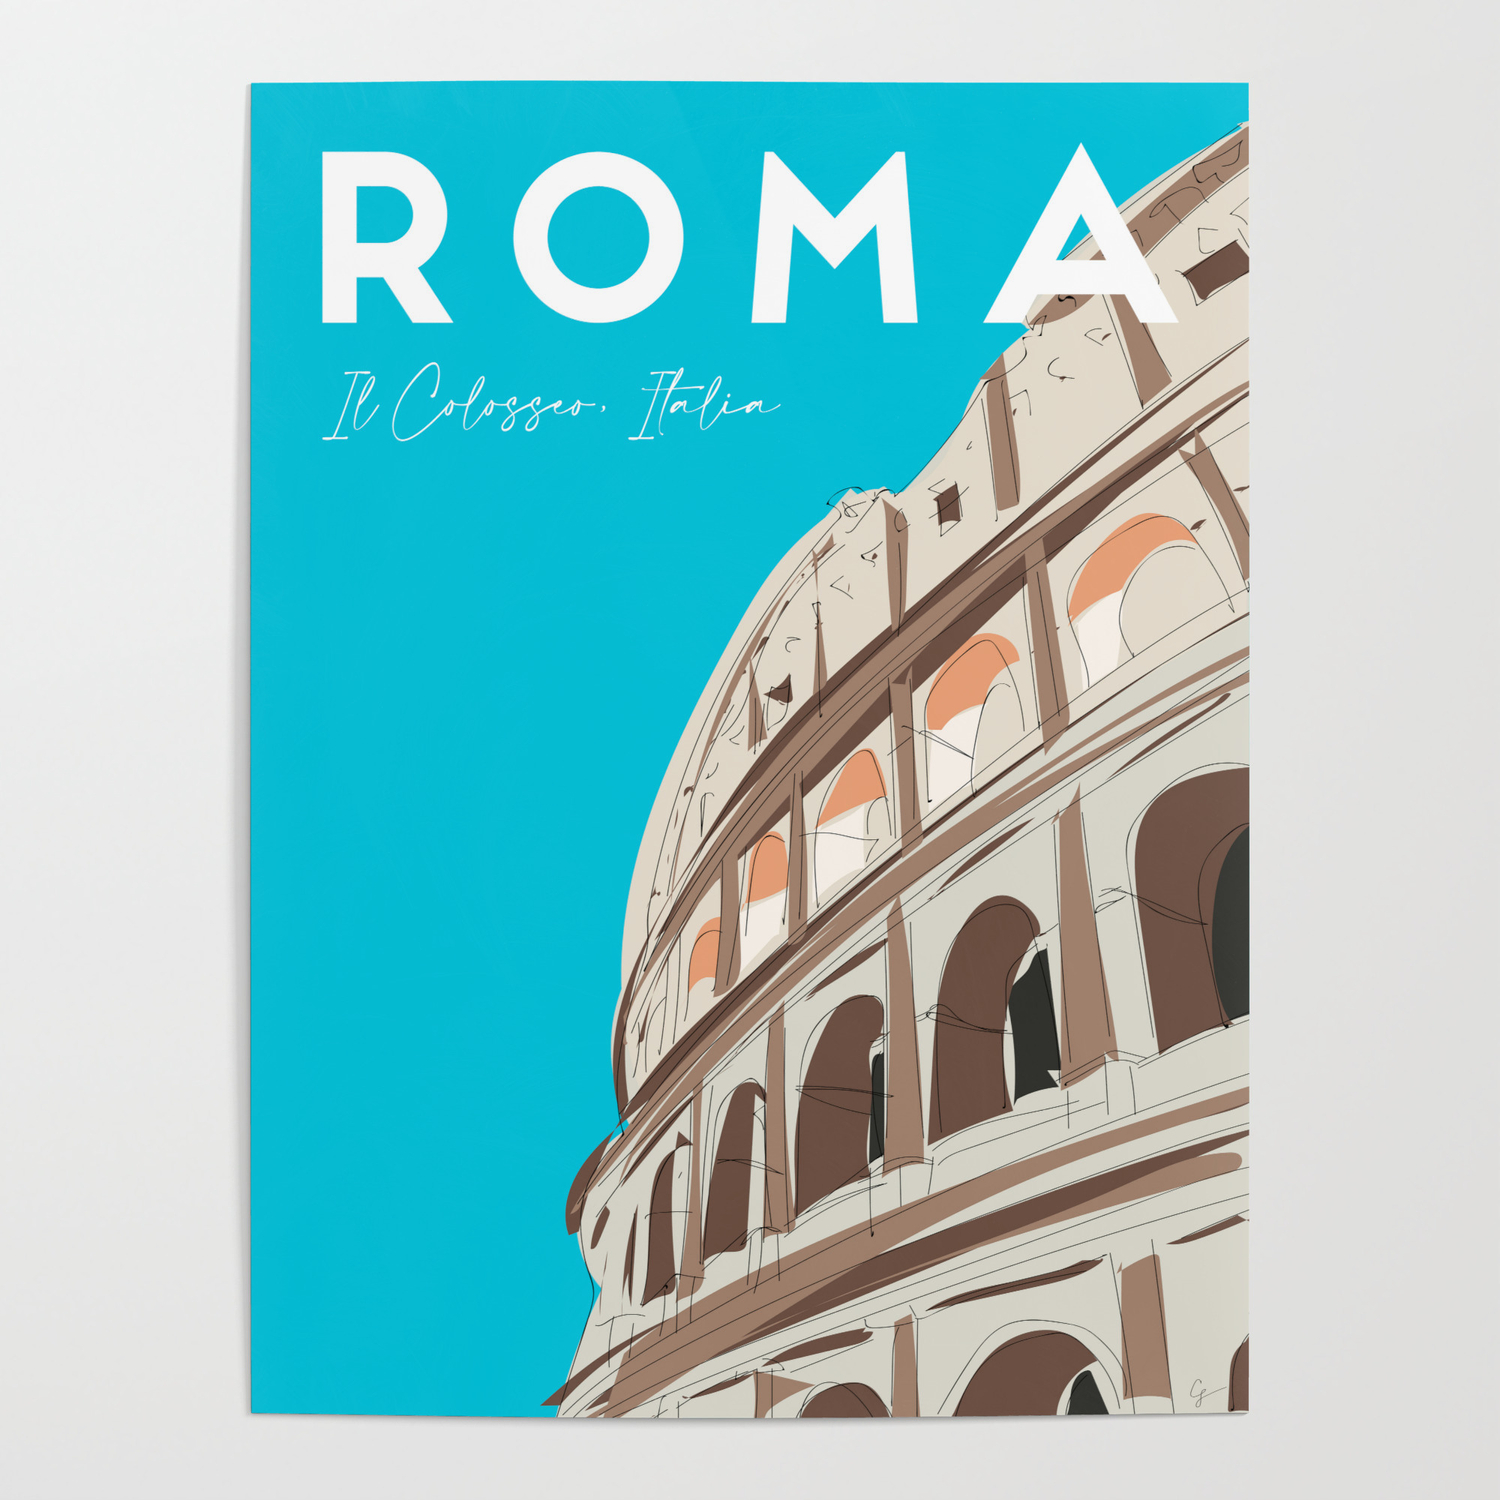 High Quality POSTER on Paper or Canvas.Travel Art Decor.Coliseum Rome.4300o 